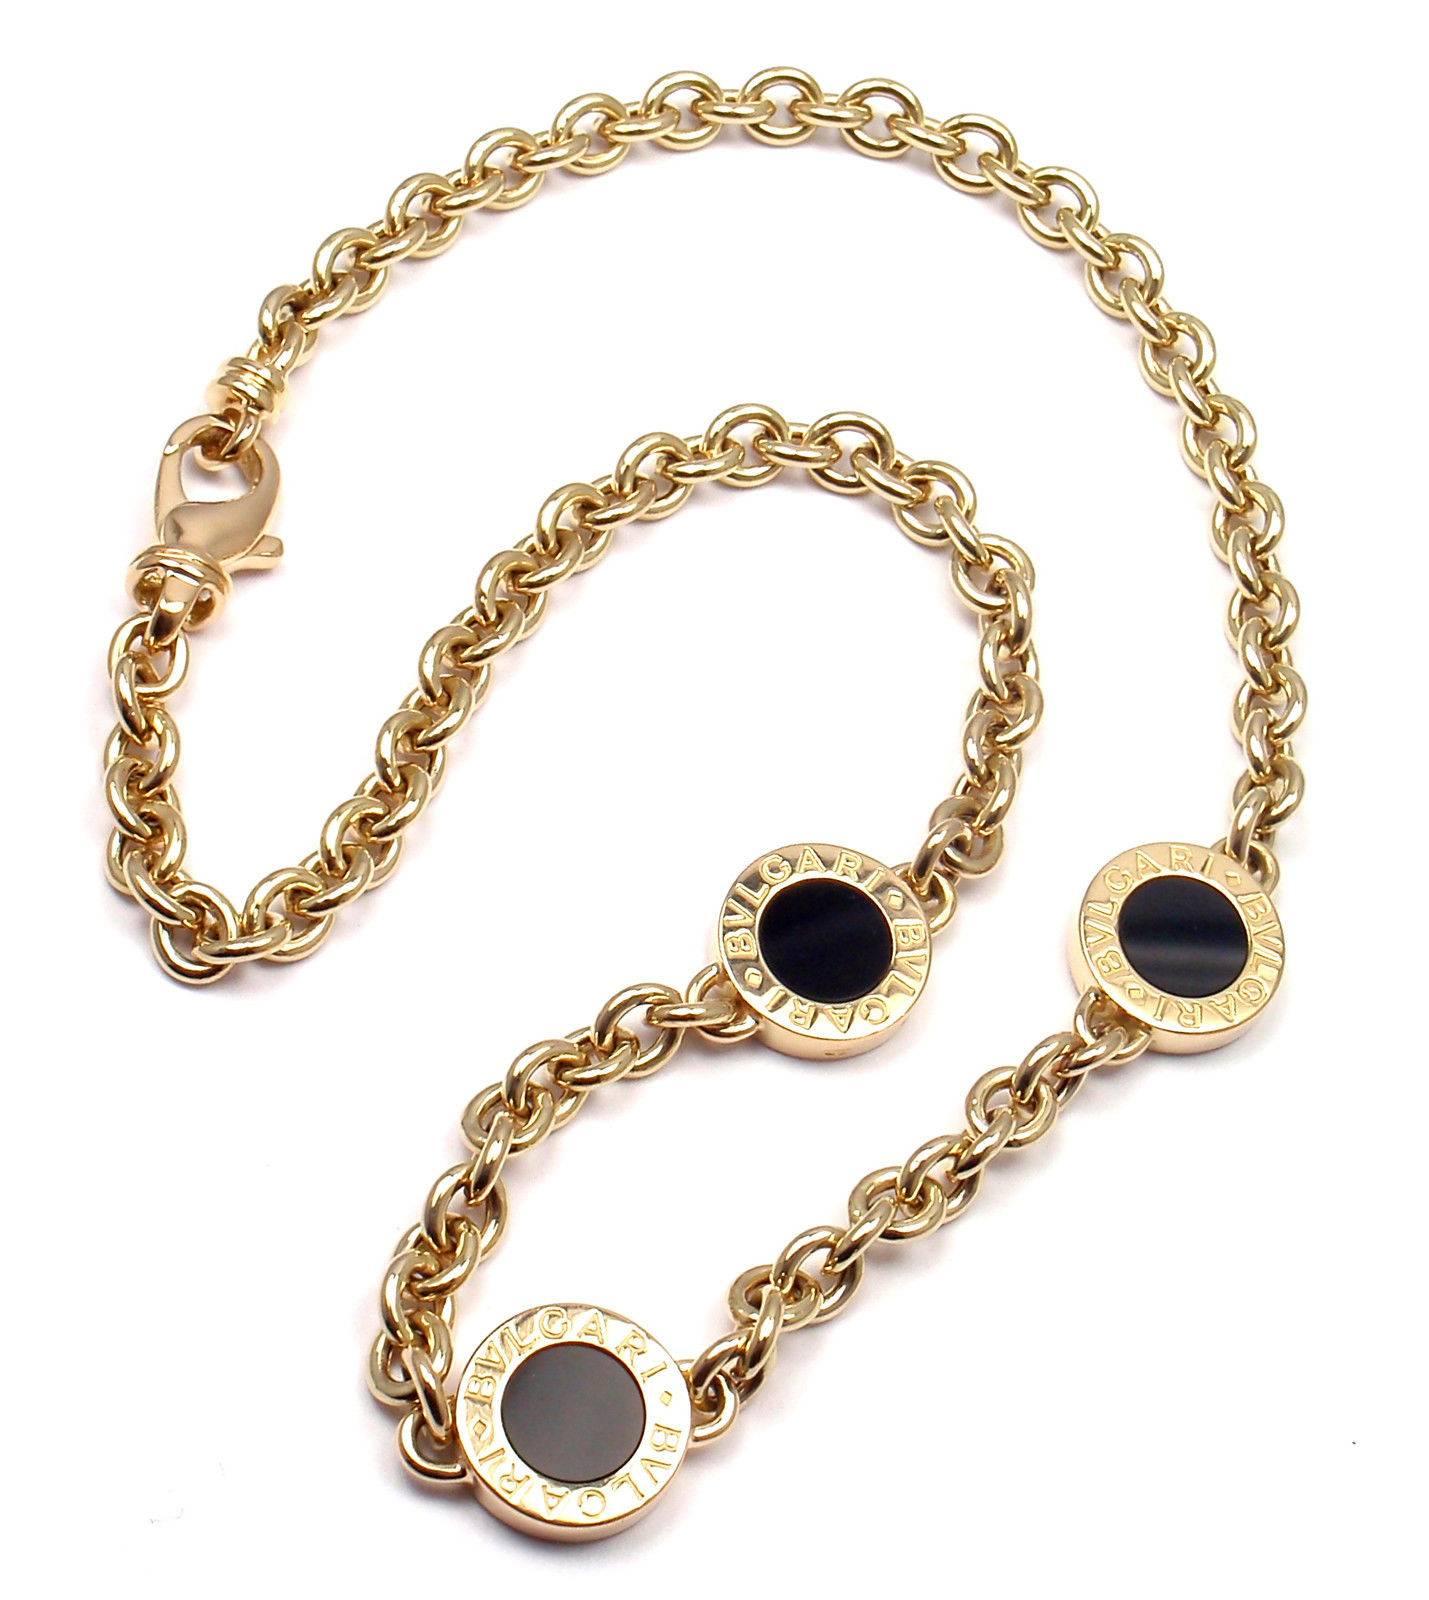 18k Yellow Gold Three Onyx Pendants Link Necklace by Bulgari.  
With 3 round black onyx stones 8mm each.
  
Details: 
Weight: 30.7 grams
Length: 15.5